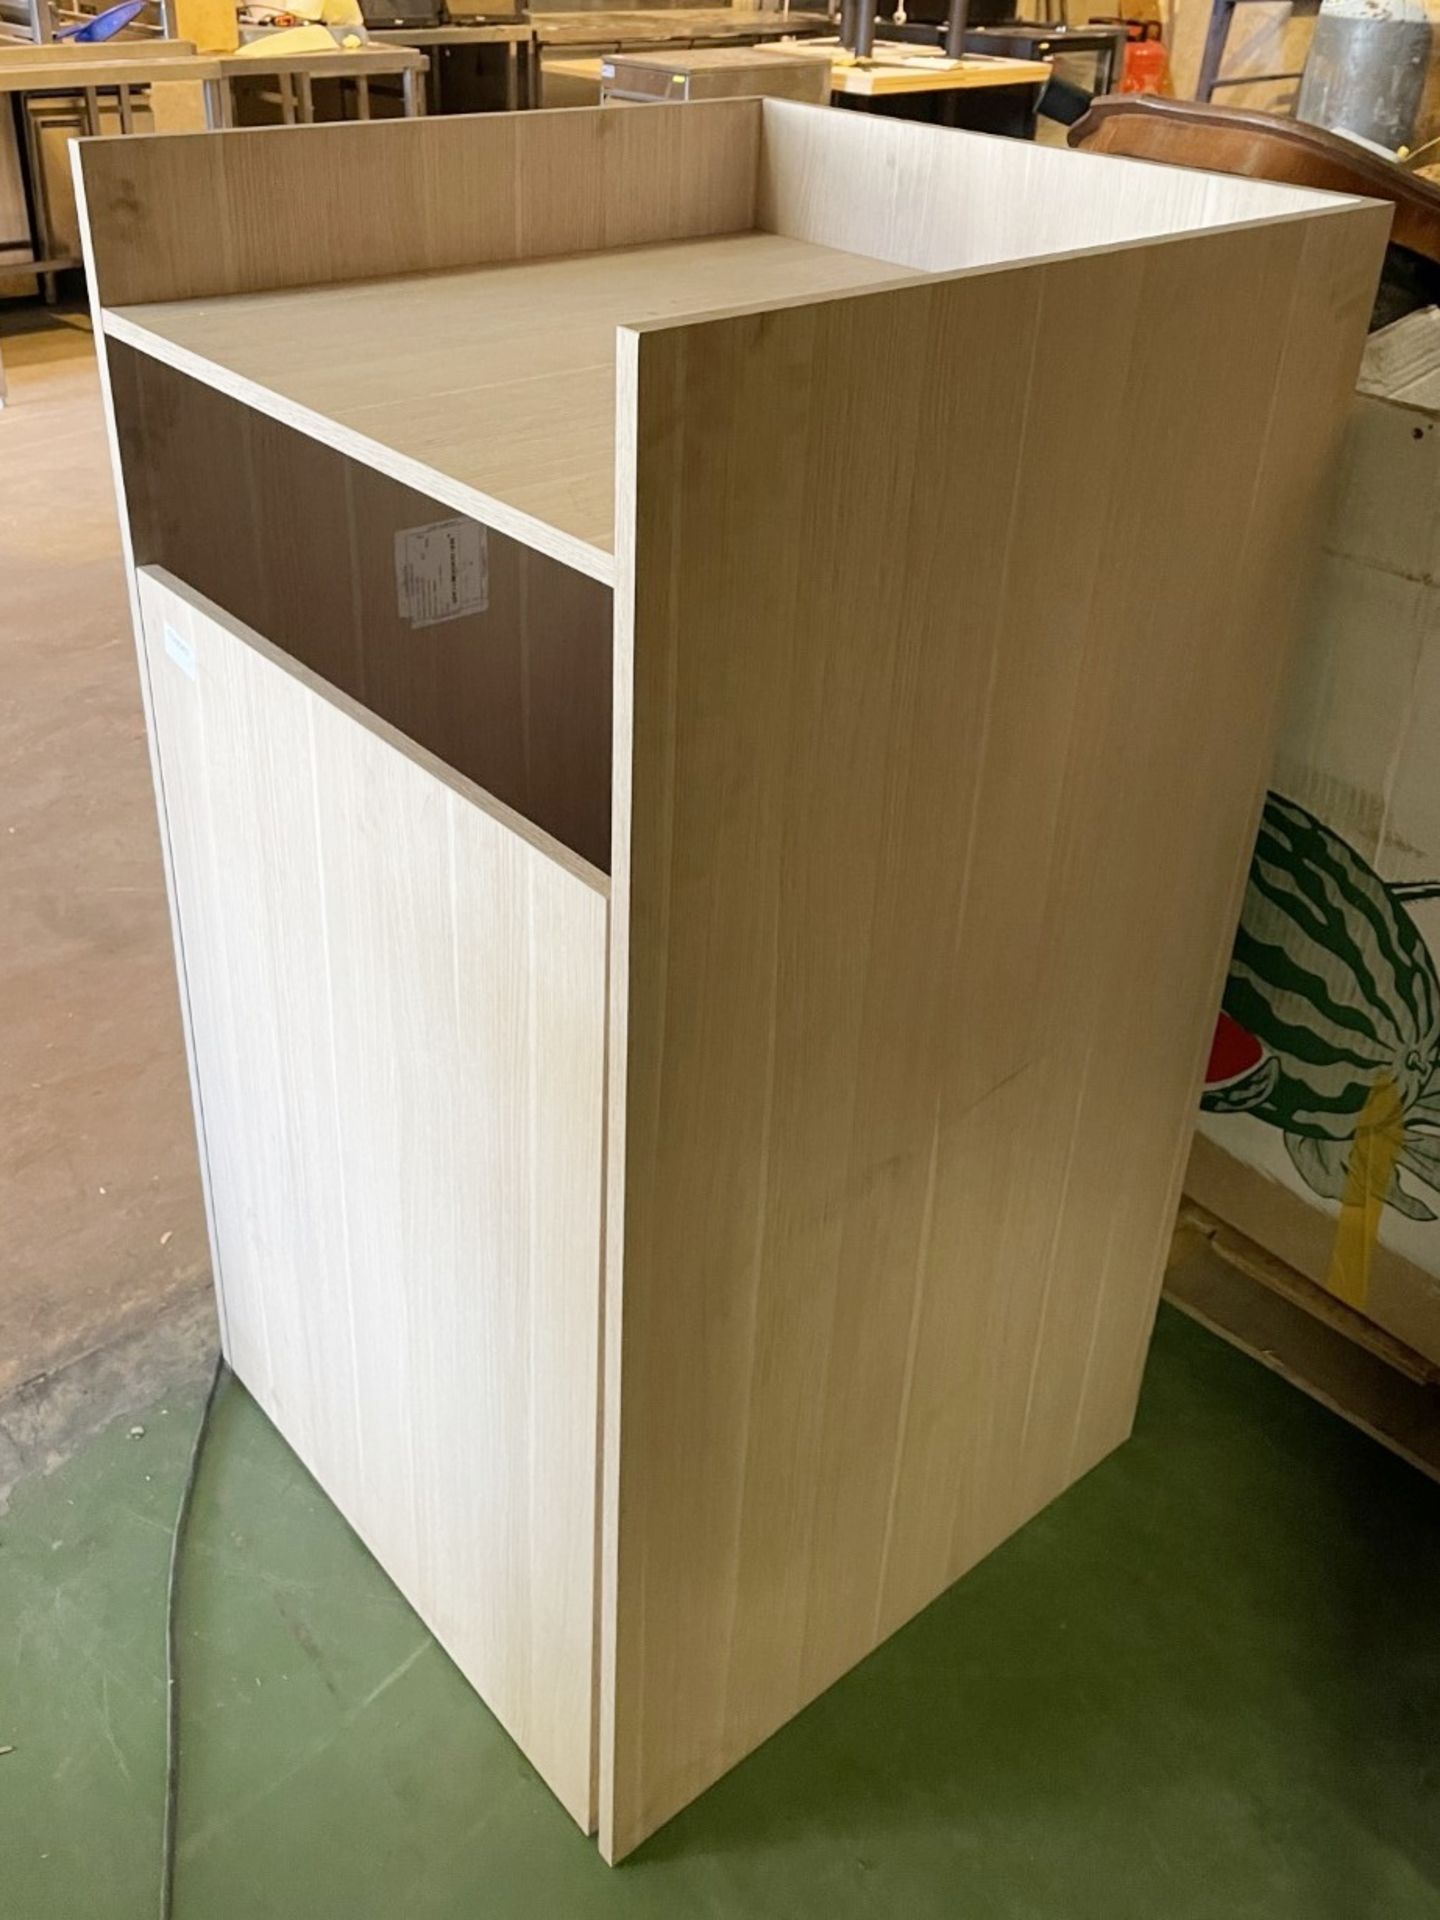 1 x Timber Bin Store And Counter For Restaurant - Approx 68x70x127cm - Ref: FGN040 - CL834 -